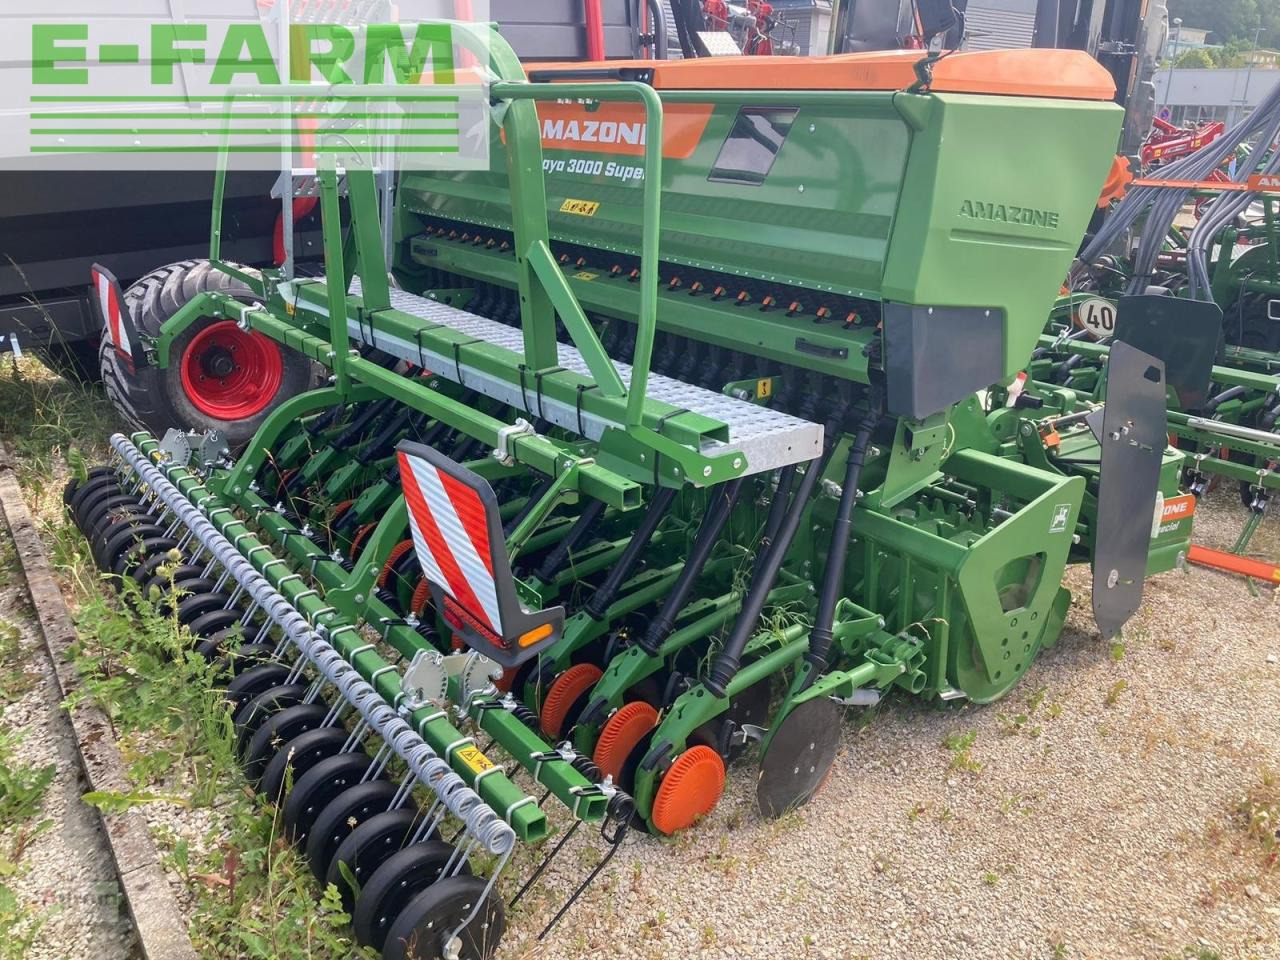 Amazone kg 3001 special + cataya 3000 super - Combine seed drill: picture 5